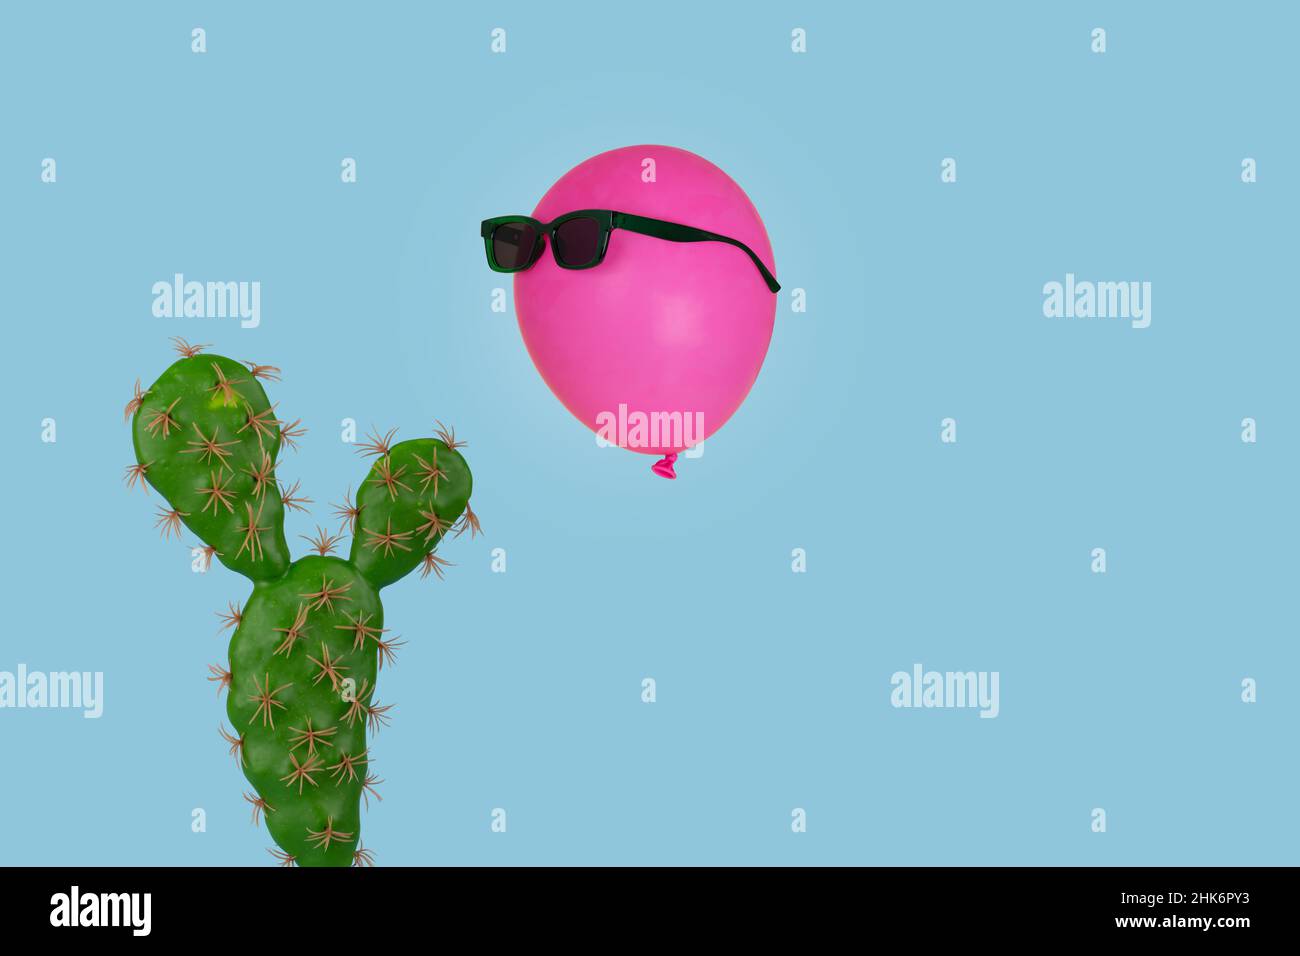 Cactus plant with above it floating a pink balloon in sunglasses isolated on a bright blue background. Creative minimal concept.  Use for card, poster Stock Photo